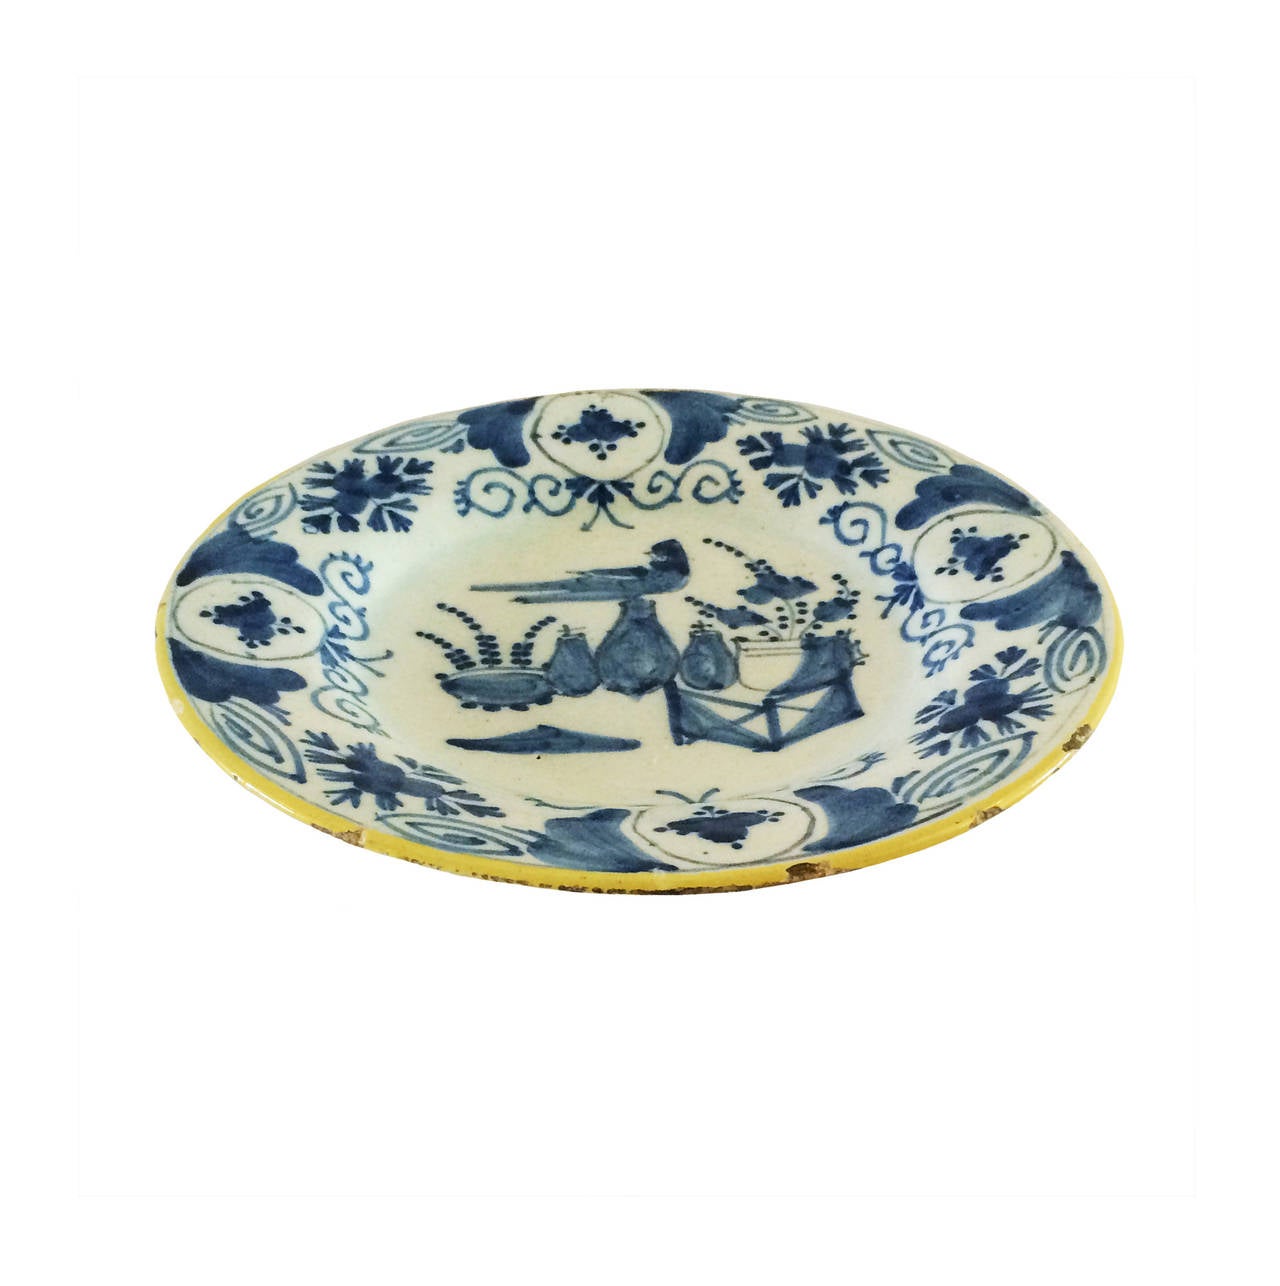 18th Century Blue & White Delft Plate; floral theme with a perched bird; yellow border; Netherlands.